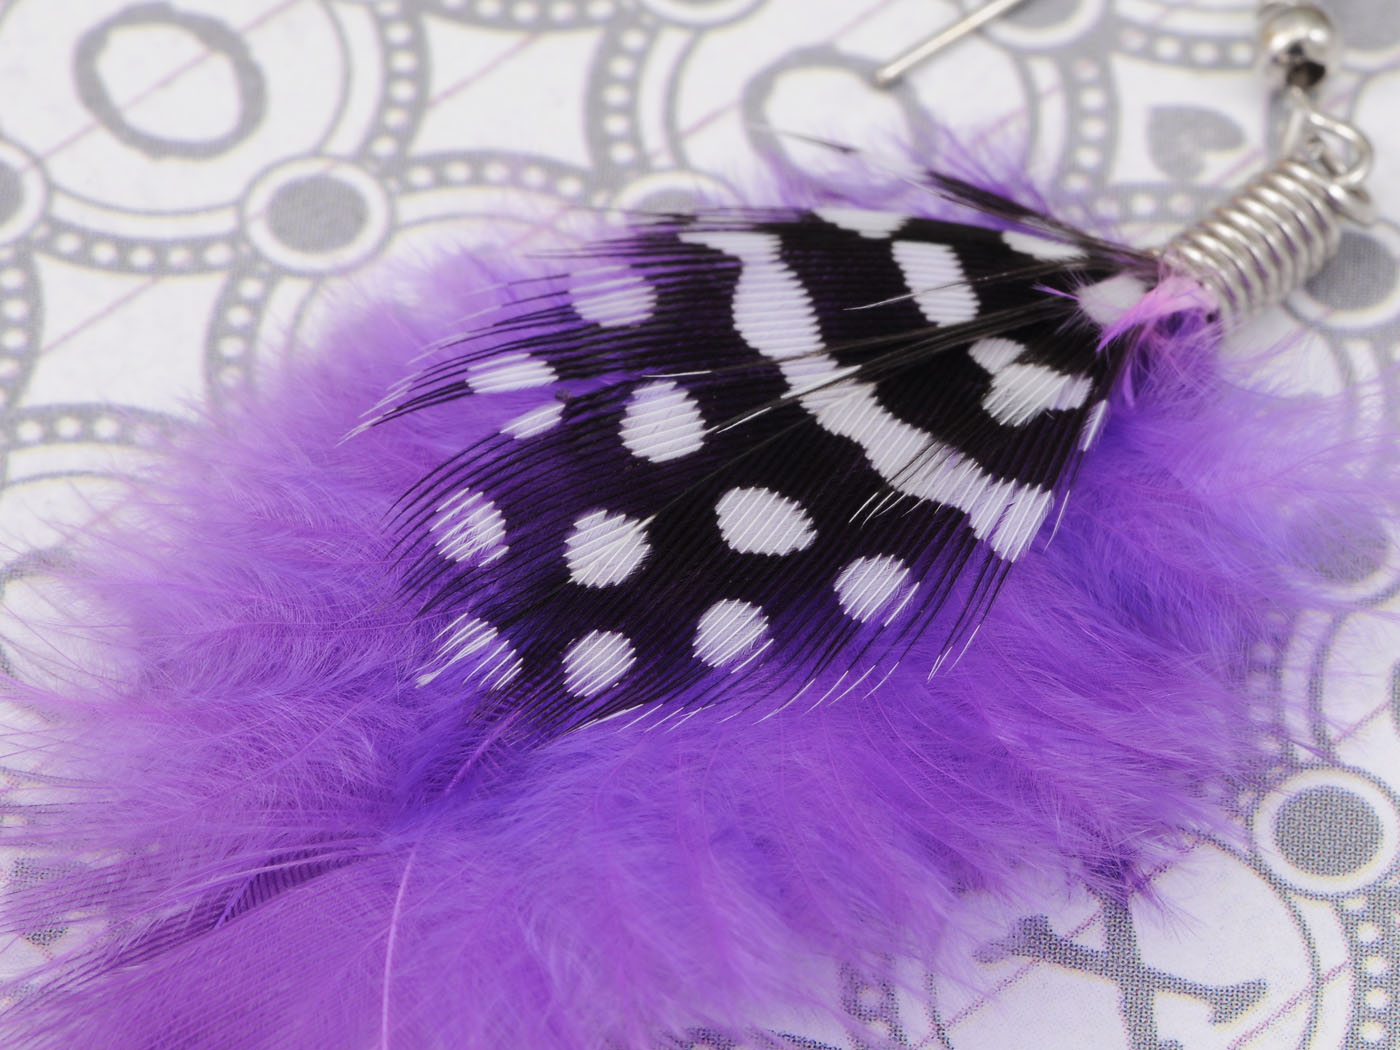 Purple Polka Dotted Diva Lavender Bright Bird Feather Fish Hook Trend Earrings